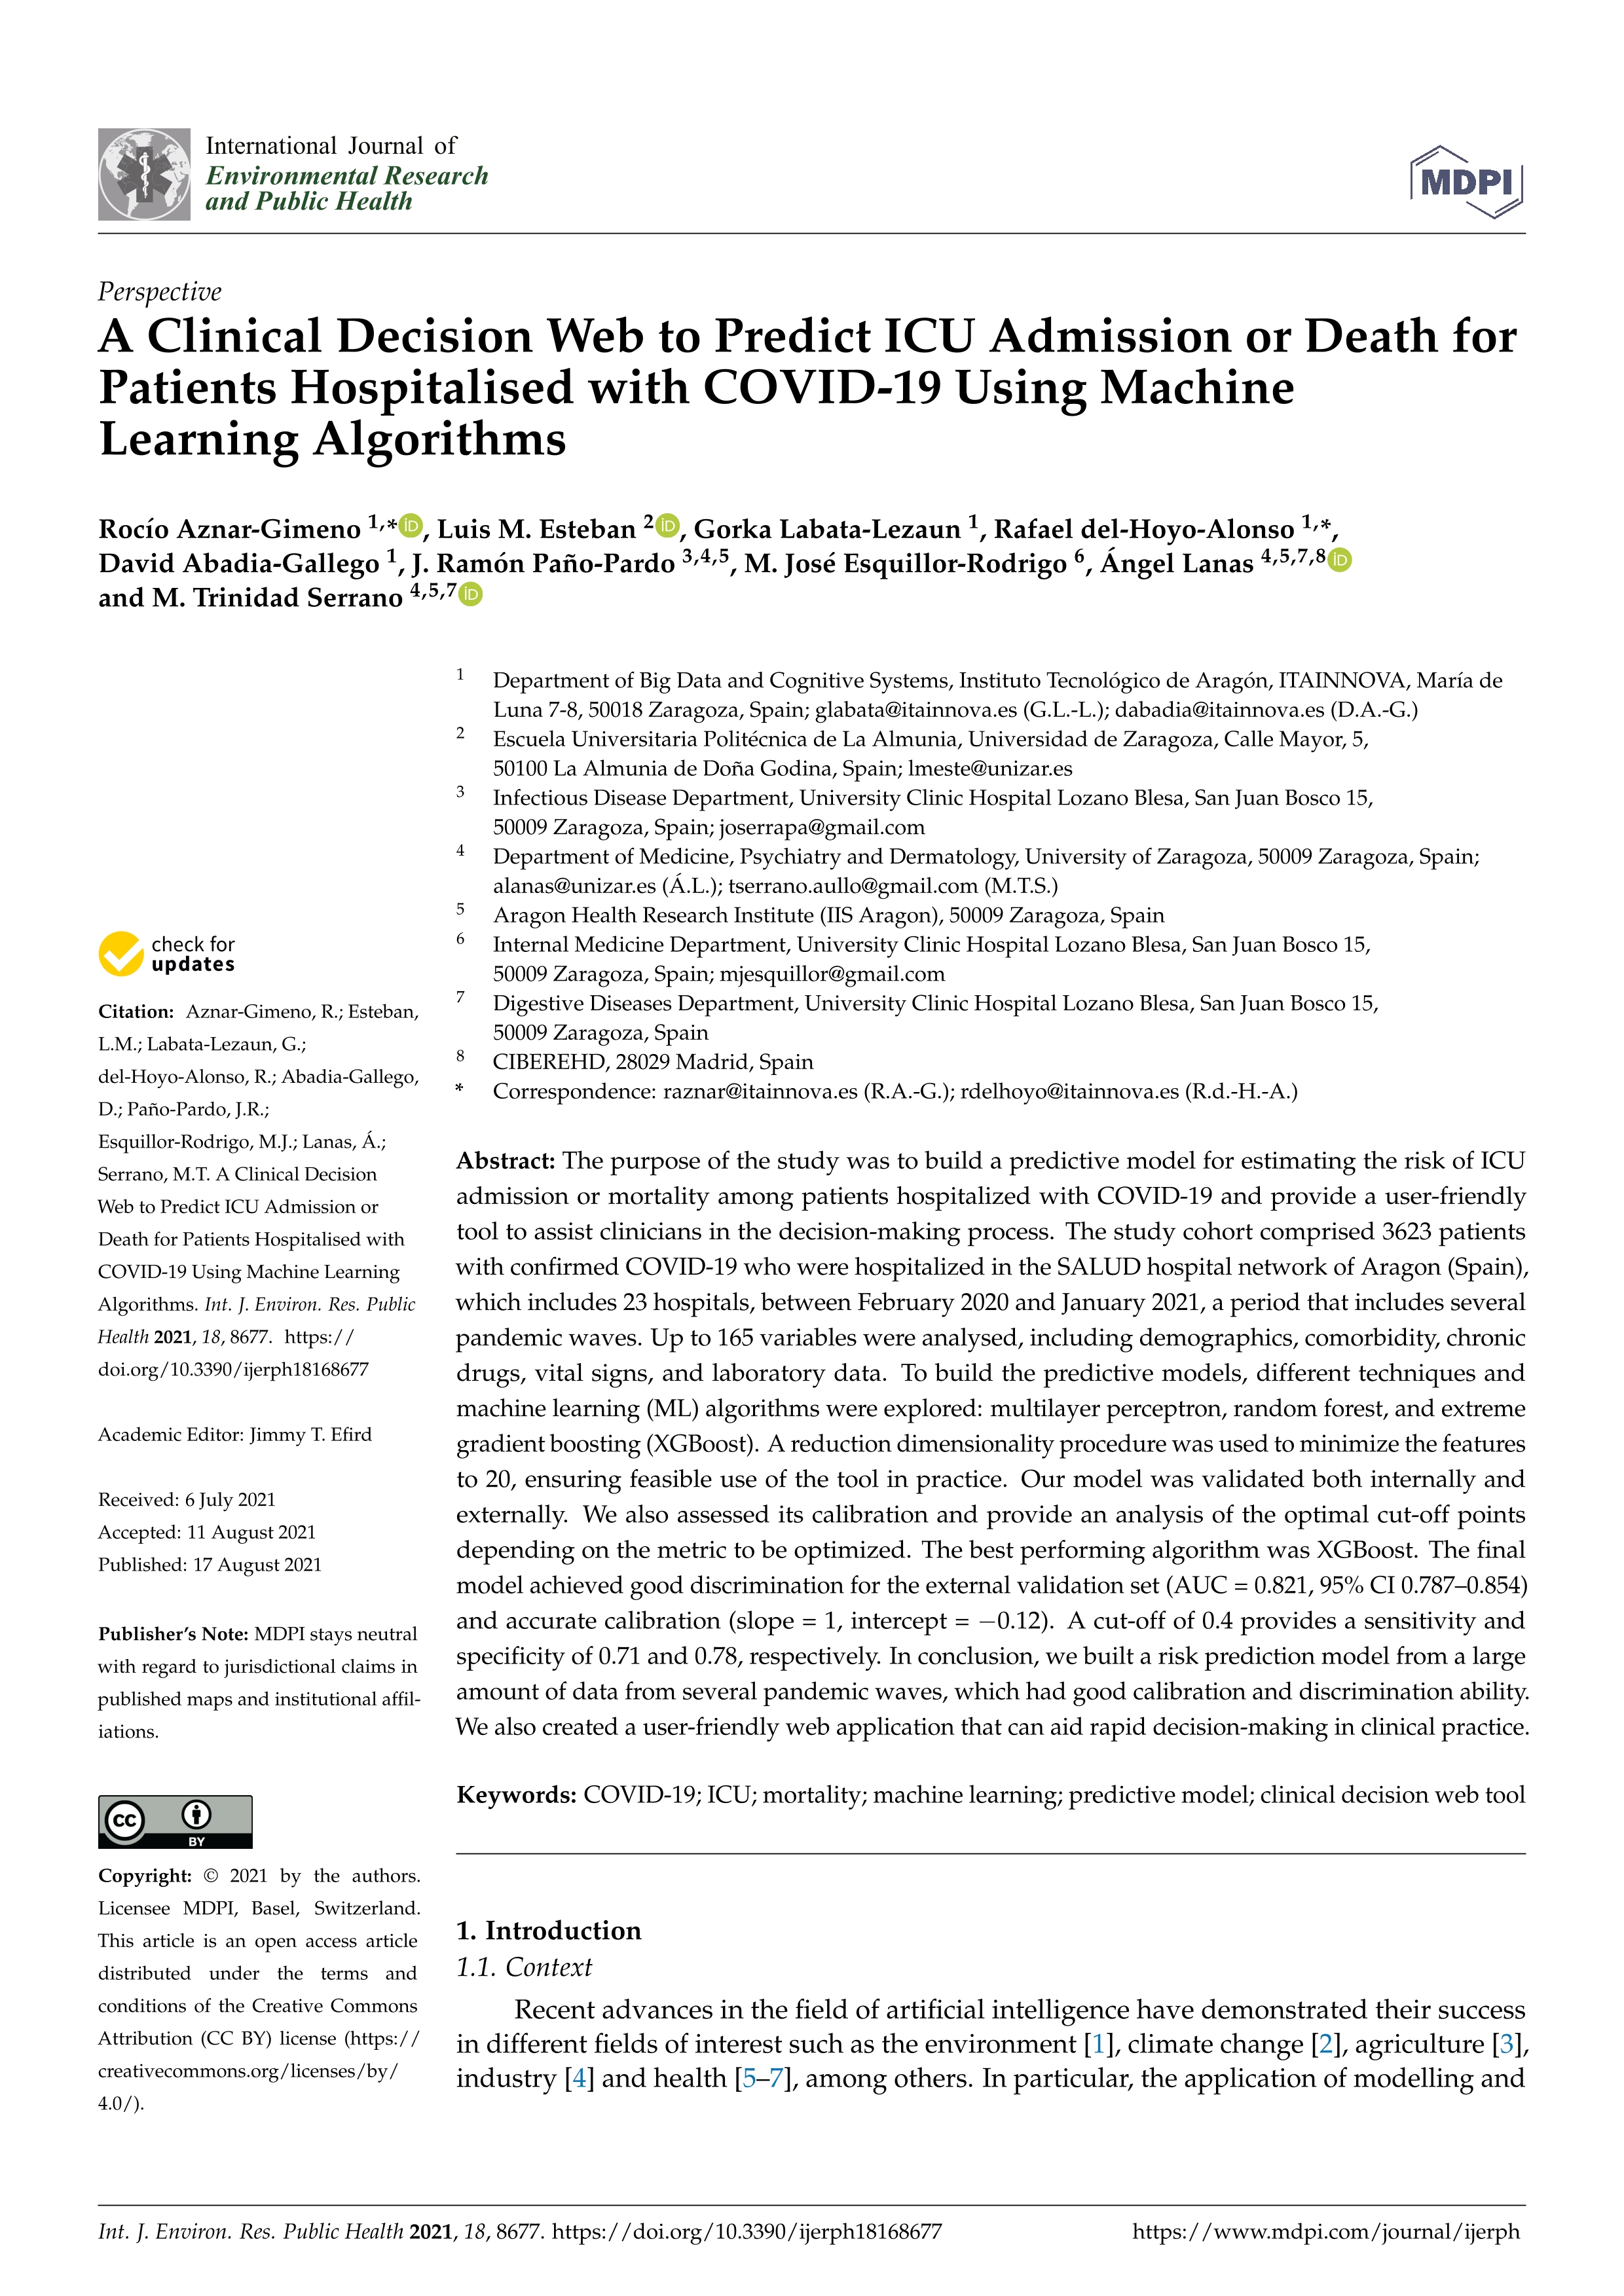 A clinical decision web to predict ICU admission or death for patients hospitalised with Covid-19 using machine learning algorithms